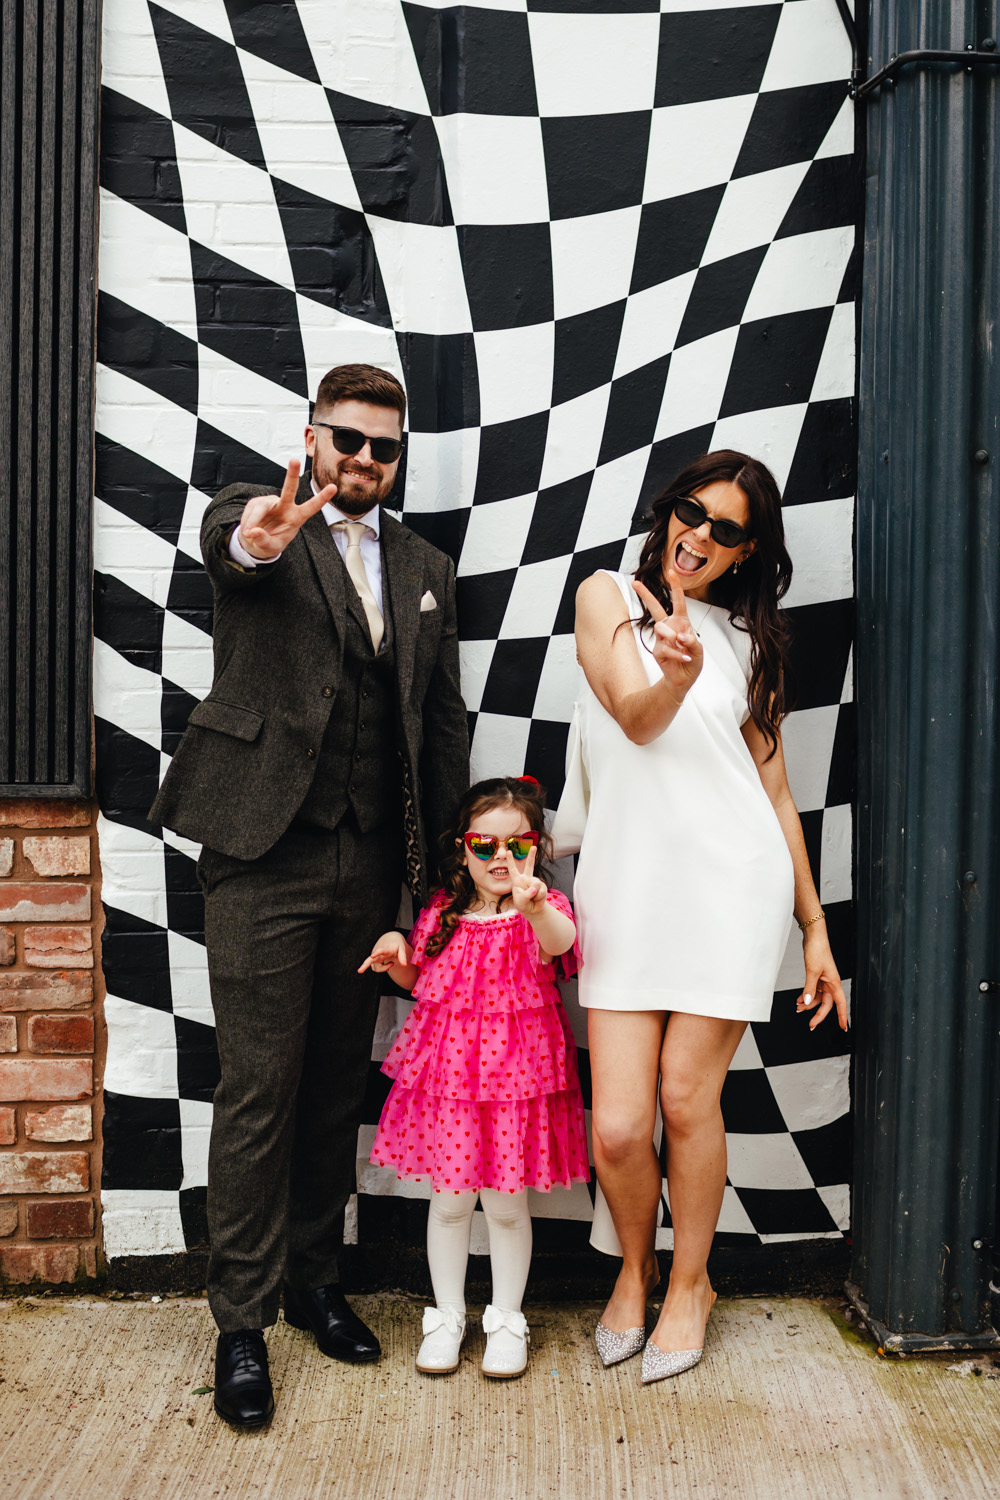 Wedding family portrait, bride in modern mini dress, grrom in a suit, little girl in a pink dress, standing in front of an abstract check wall, holding up their fingers in 'peace' signs